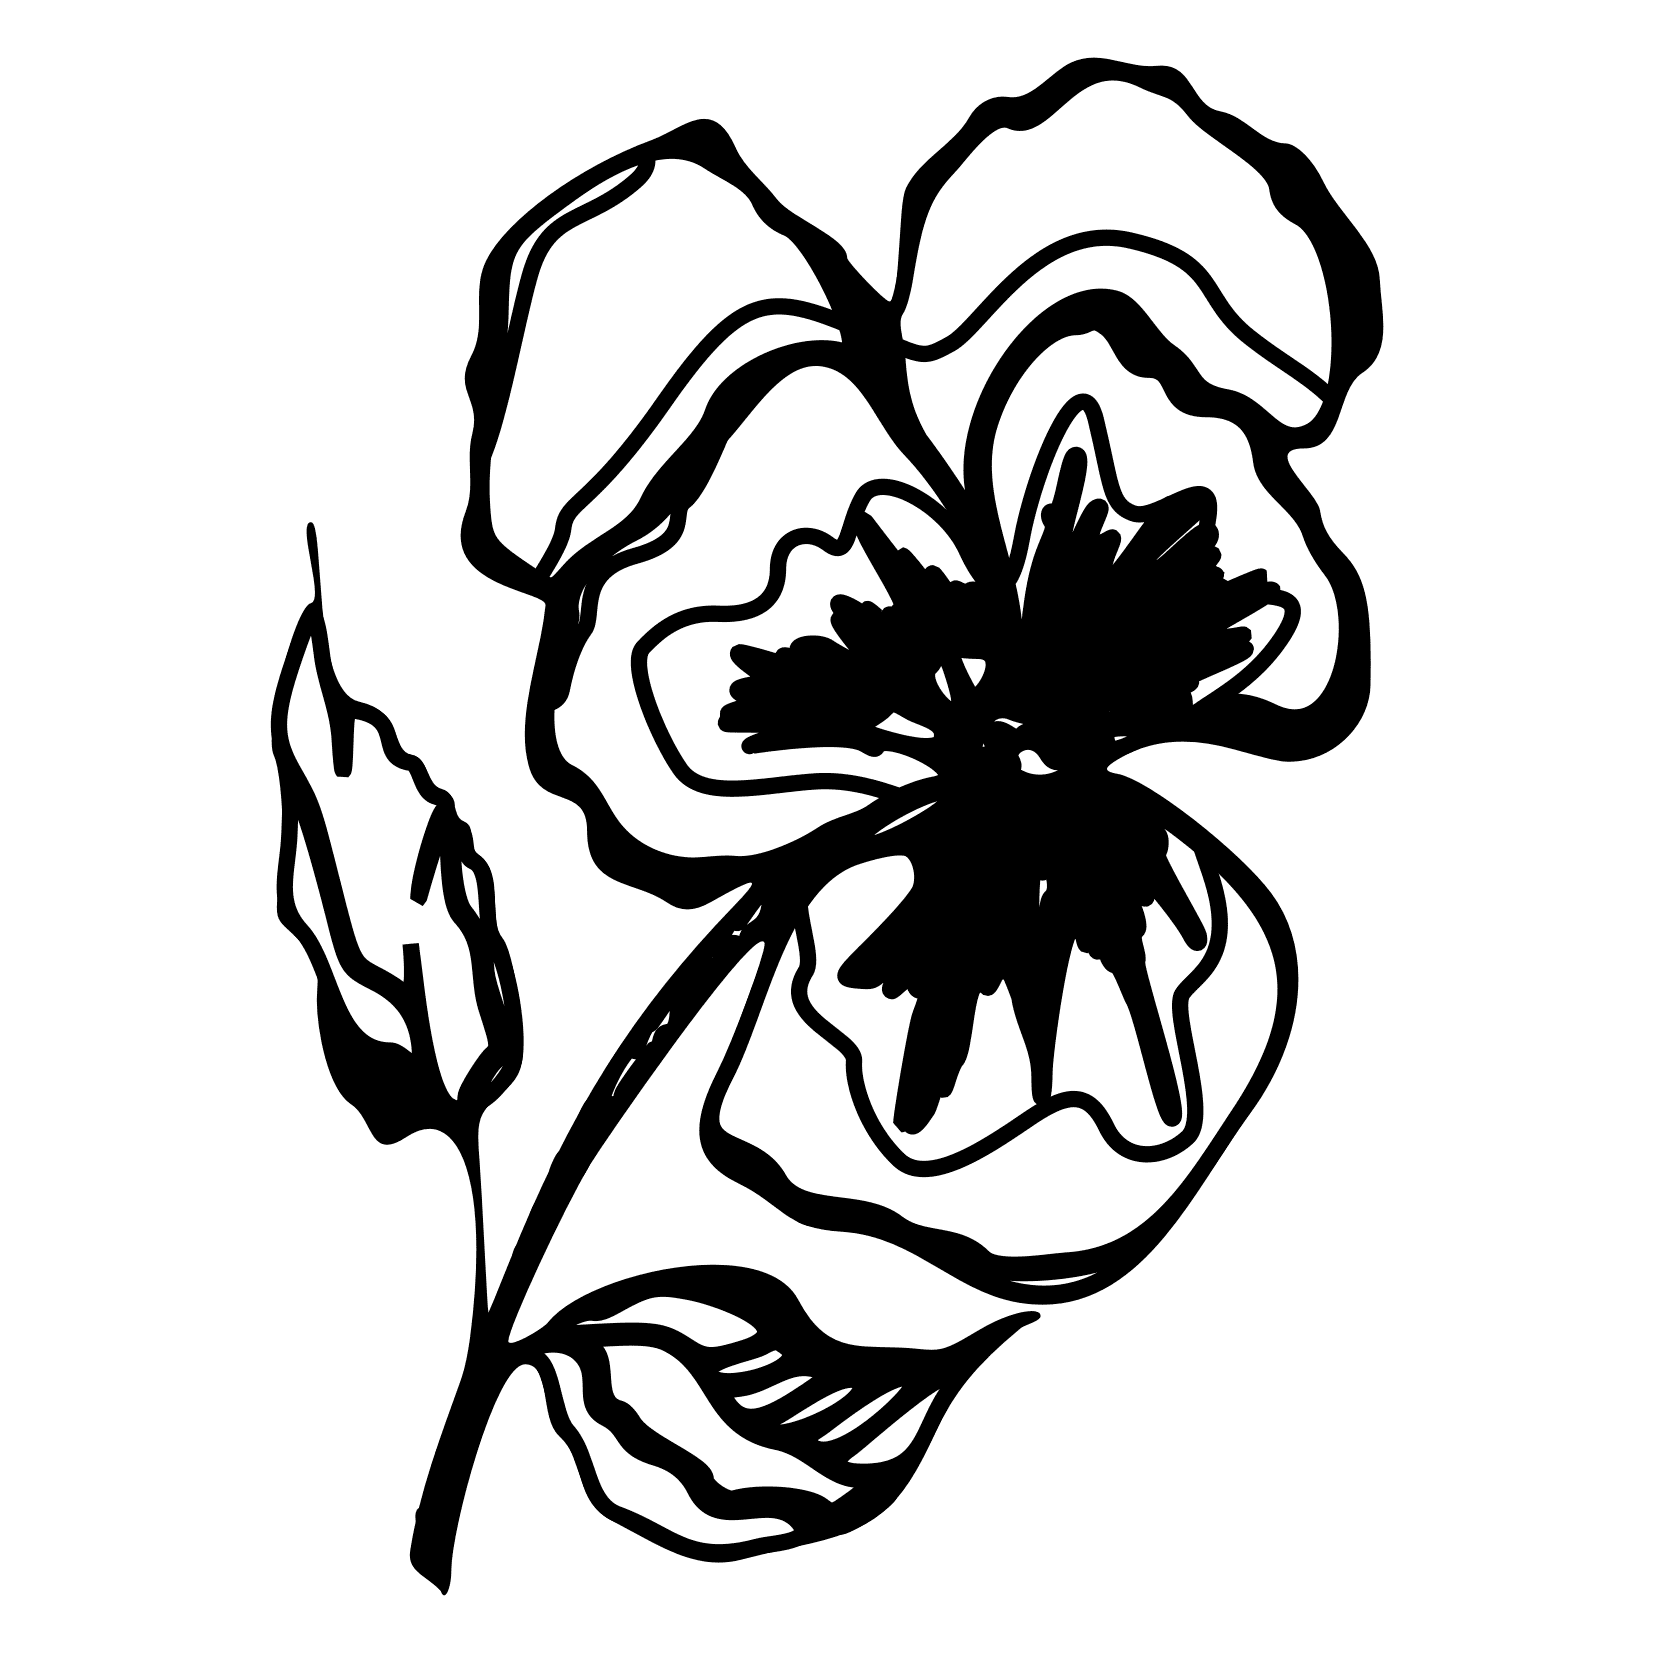 Pansy Flower Sweeet Print Coloring Page